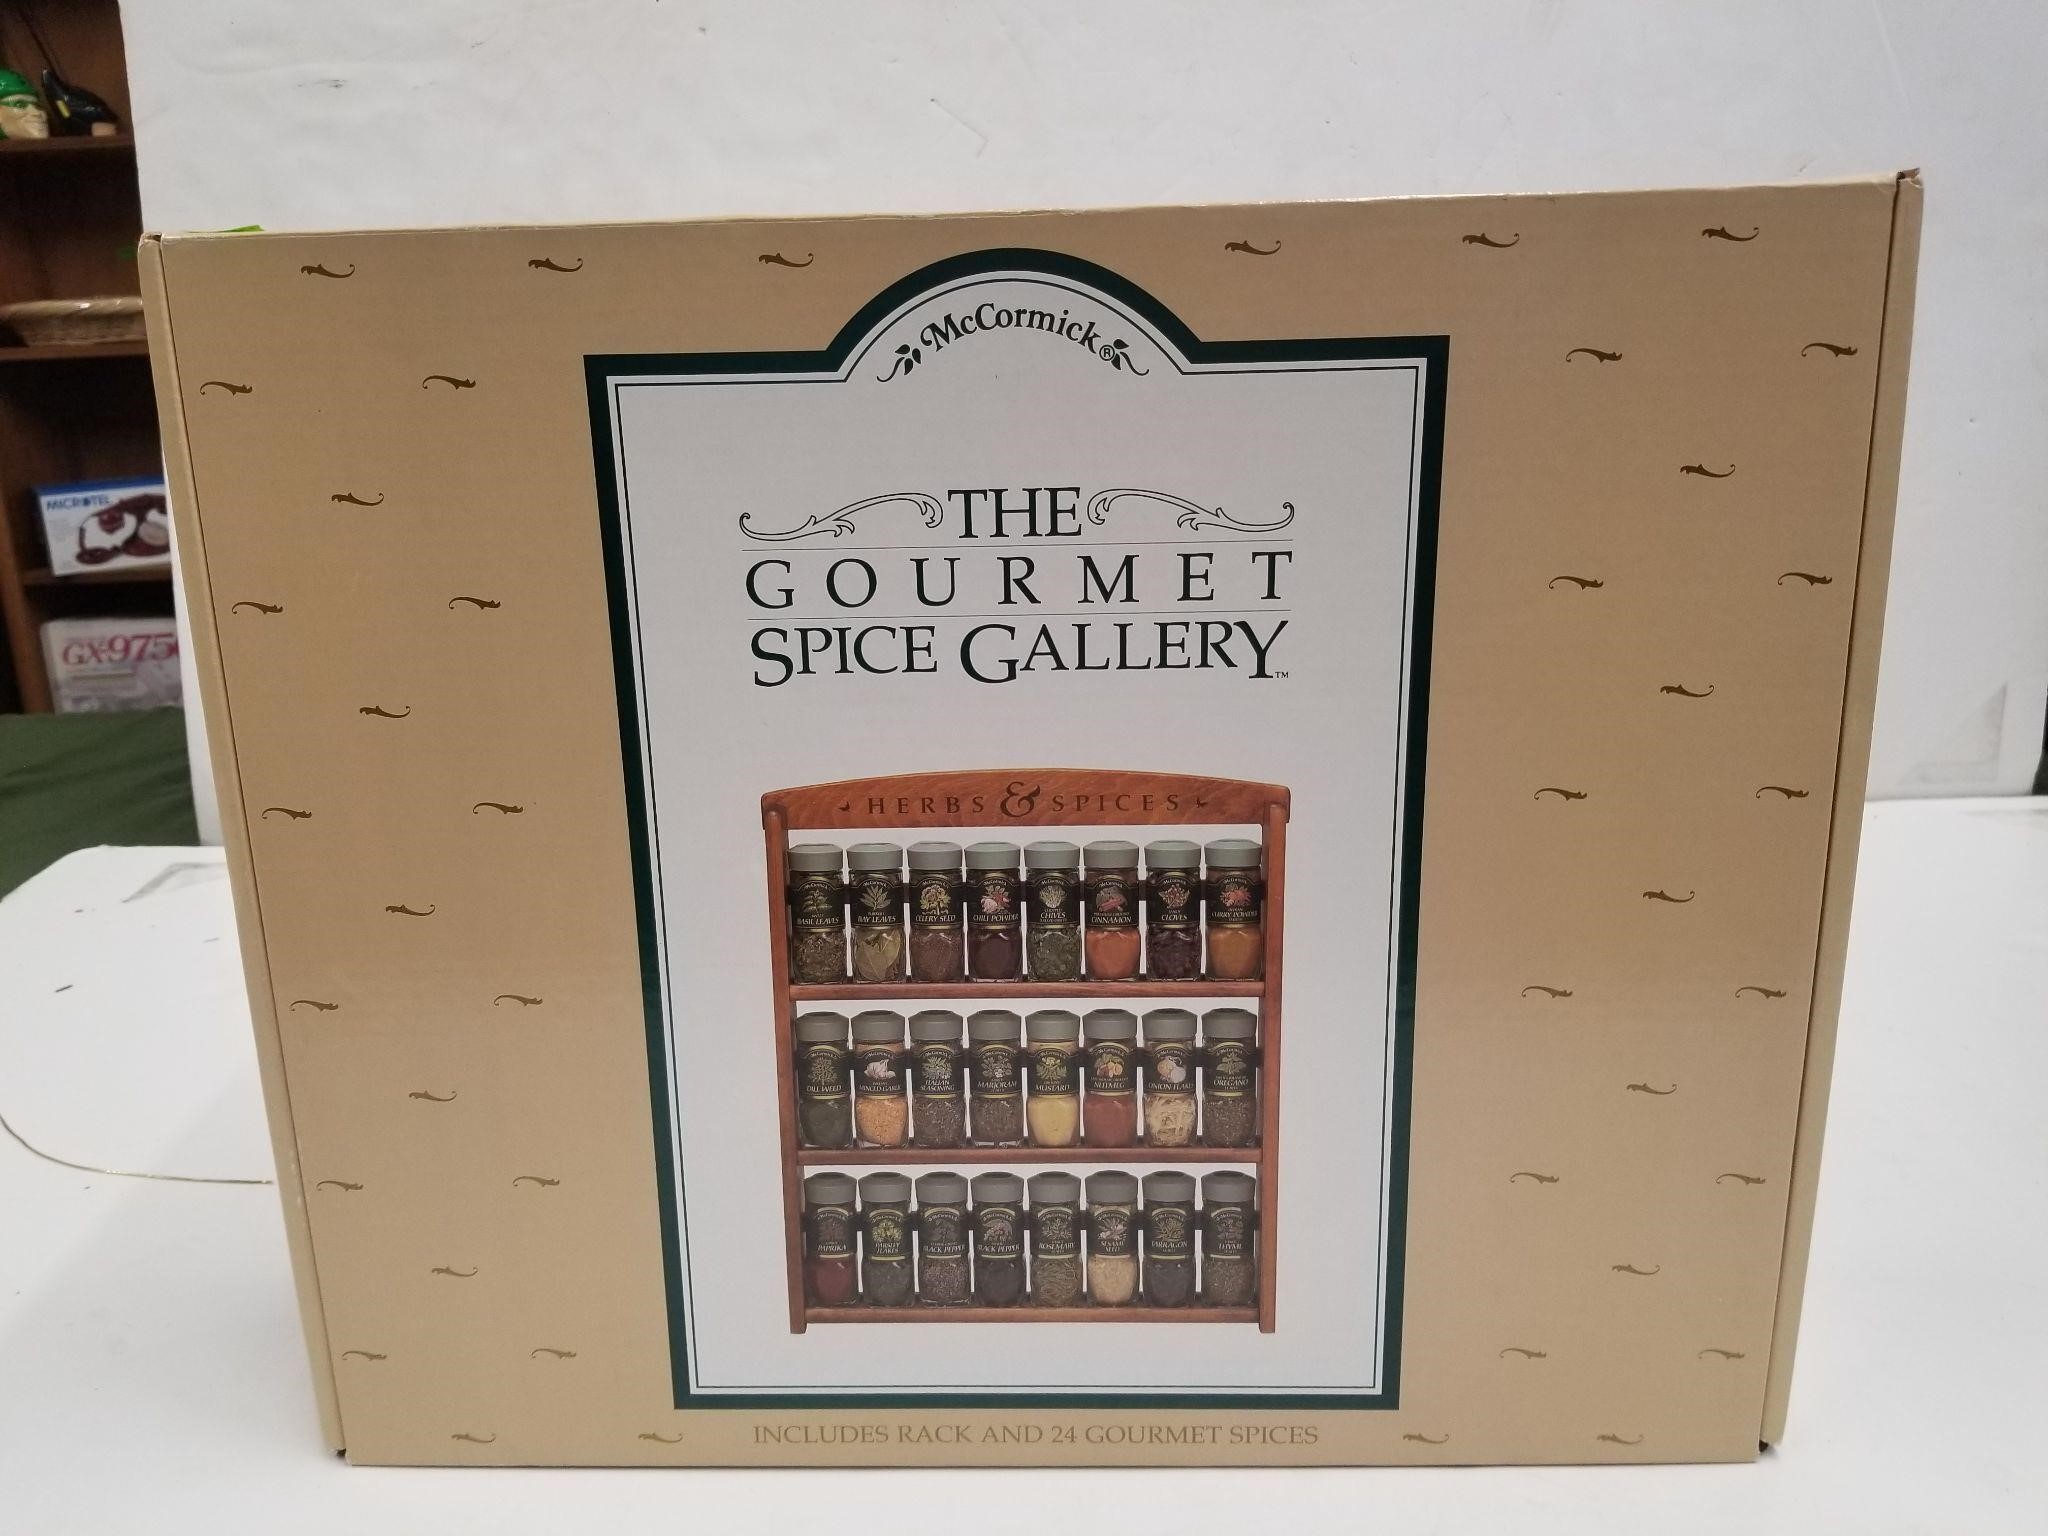 The Gourmet Spice Gallery